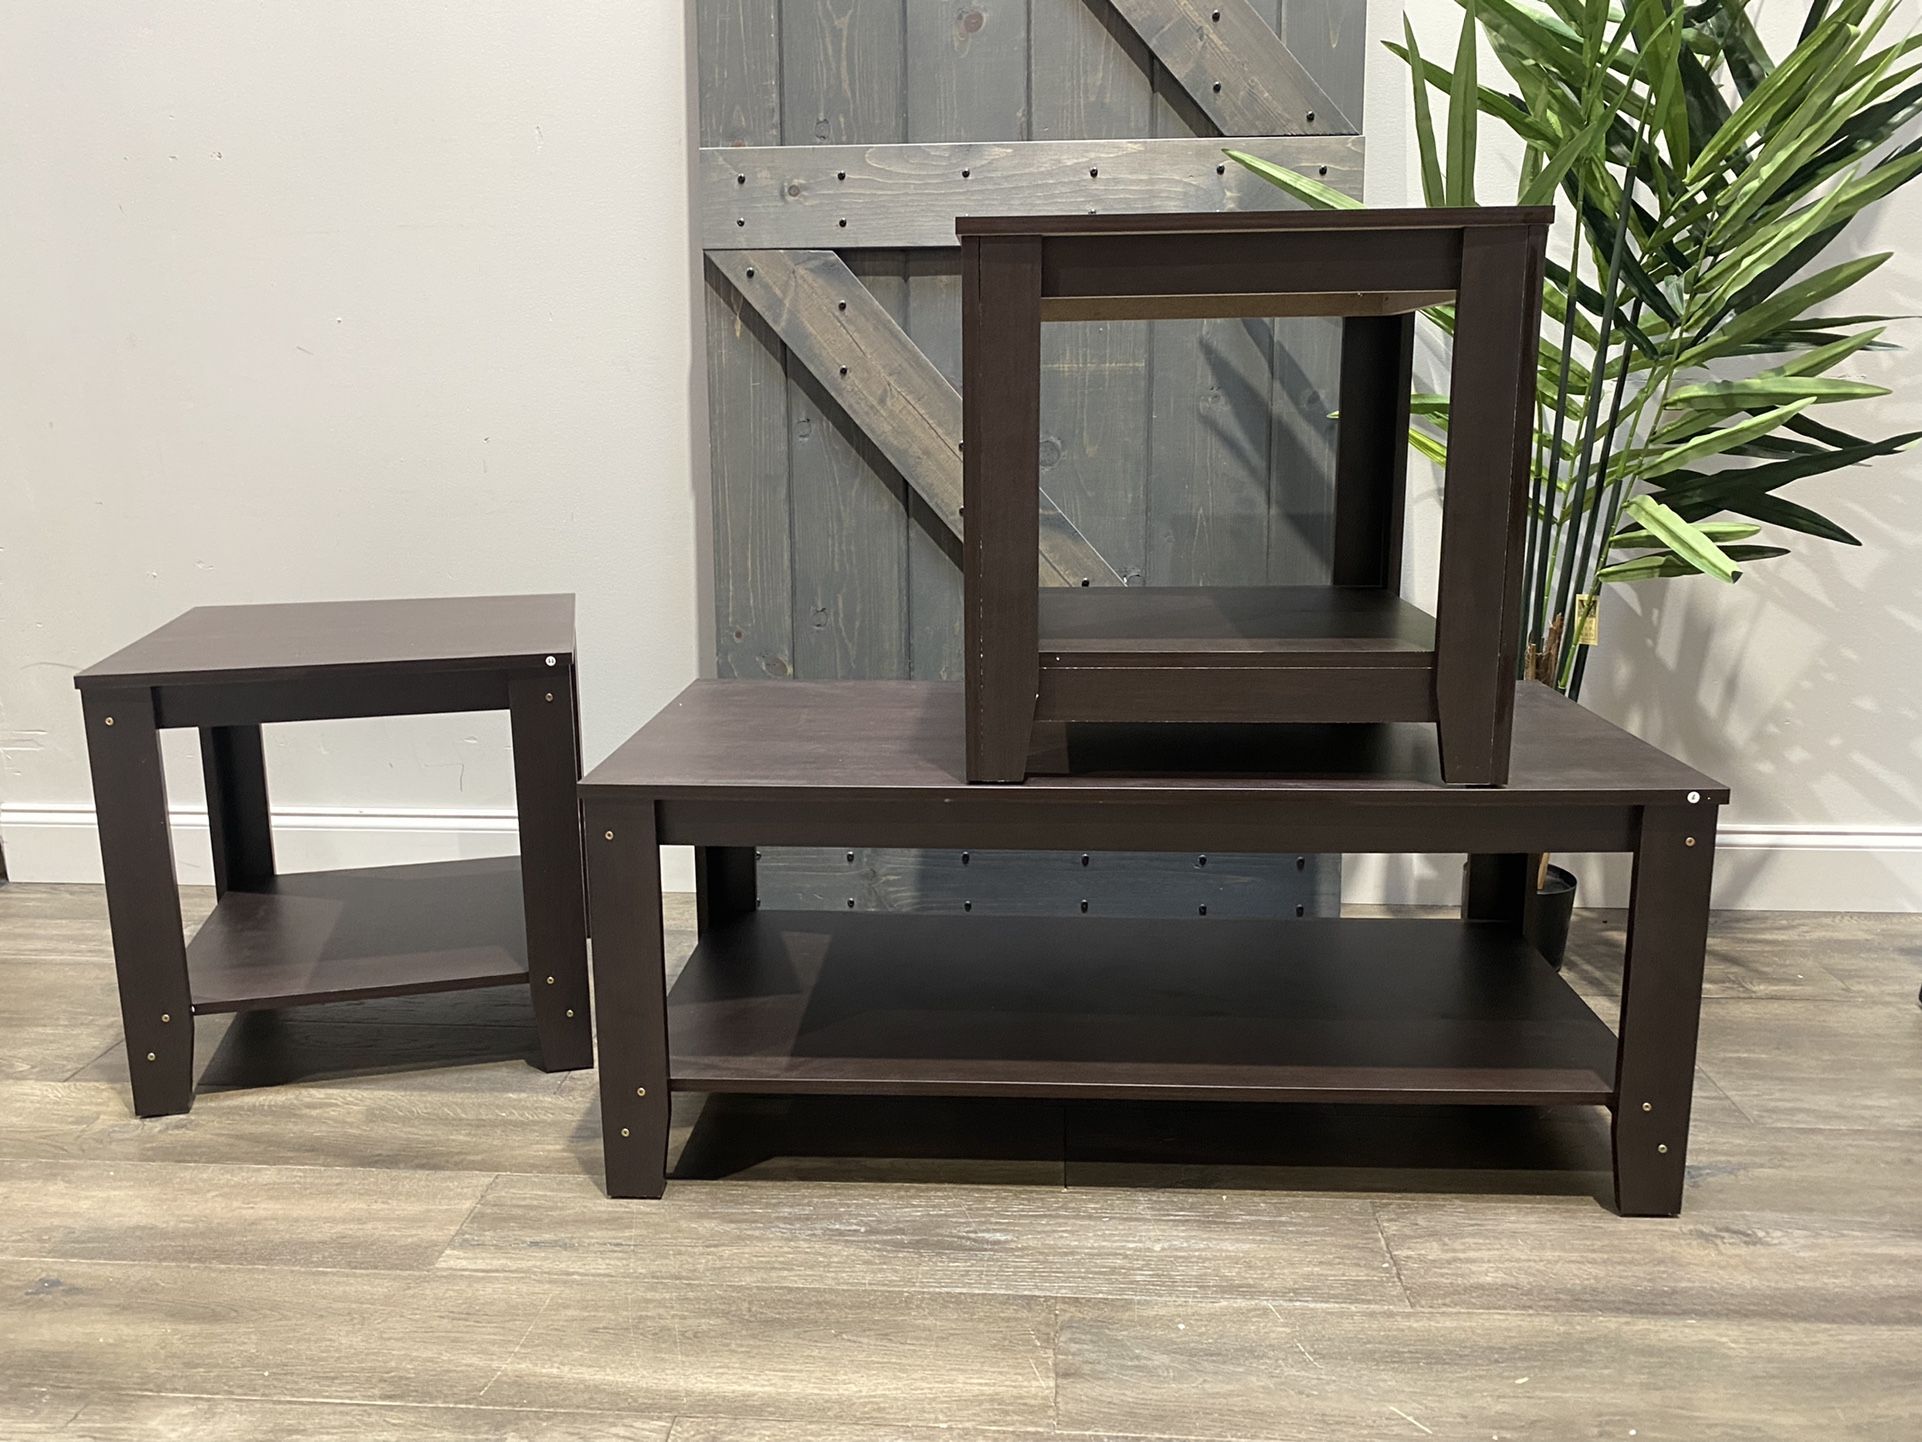 Streator 3 Piece Coffee Table Set. Newly assembled with slight wear: 16” x 42” x 20.5 and 20” x 20” x 20”. Solid + manufactured wood. MSRP $246. Our p